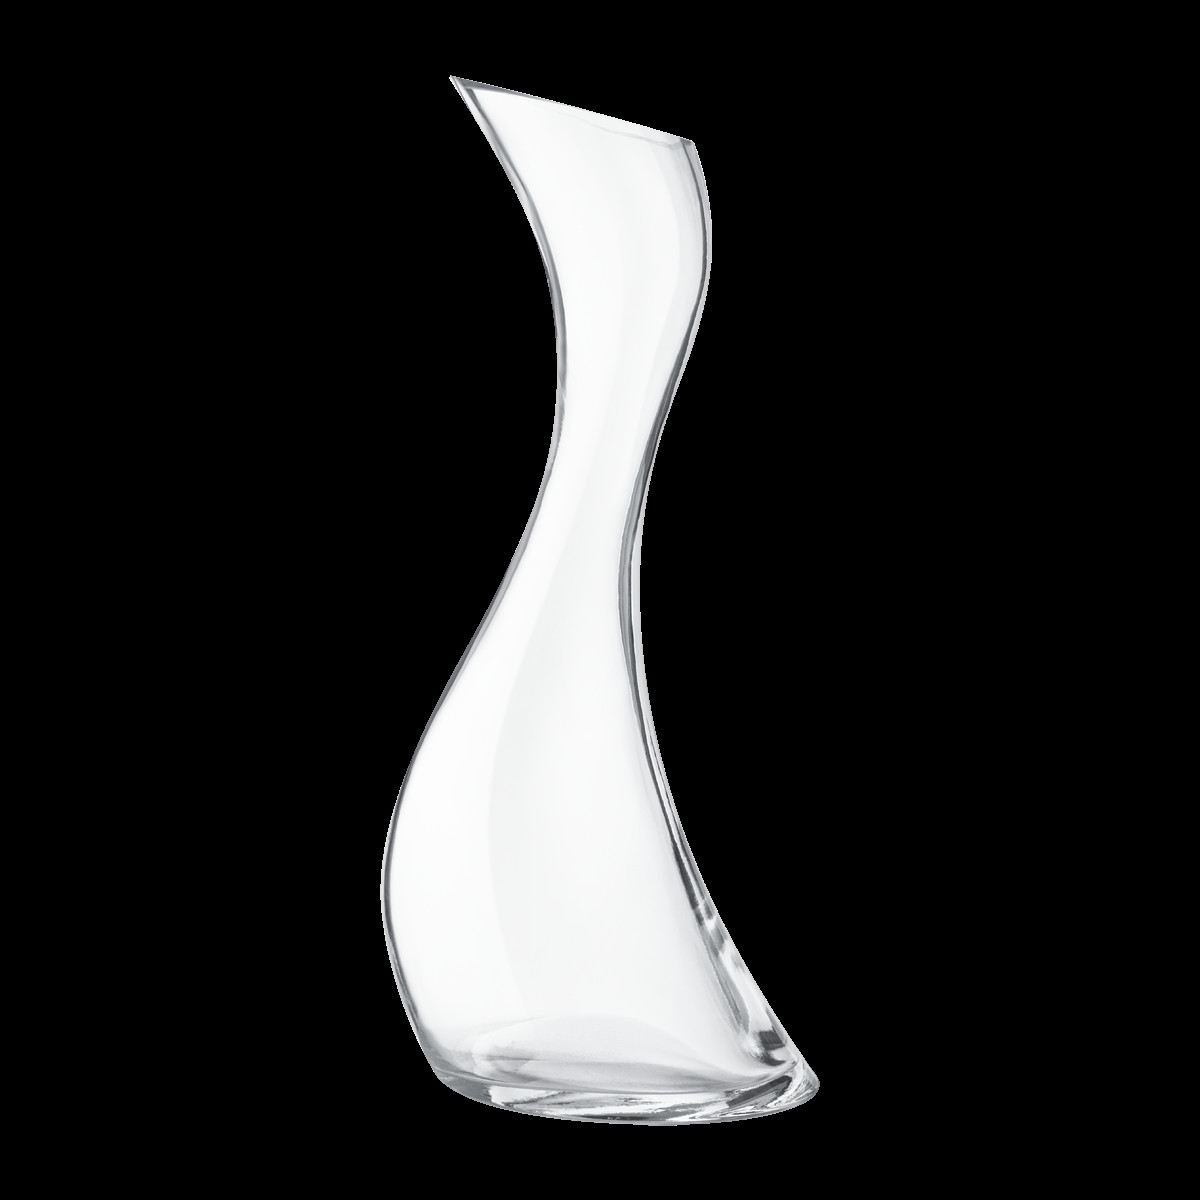 18 Lovely Georg Jensen Living Vase 2024 free download georg jensen living vase of cobra iconic curved carafe in clear glass georg jensen throughout pack 3586612 1200 0